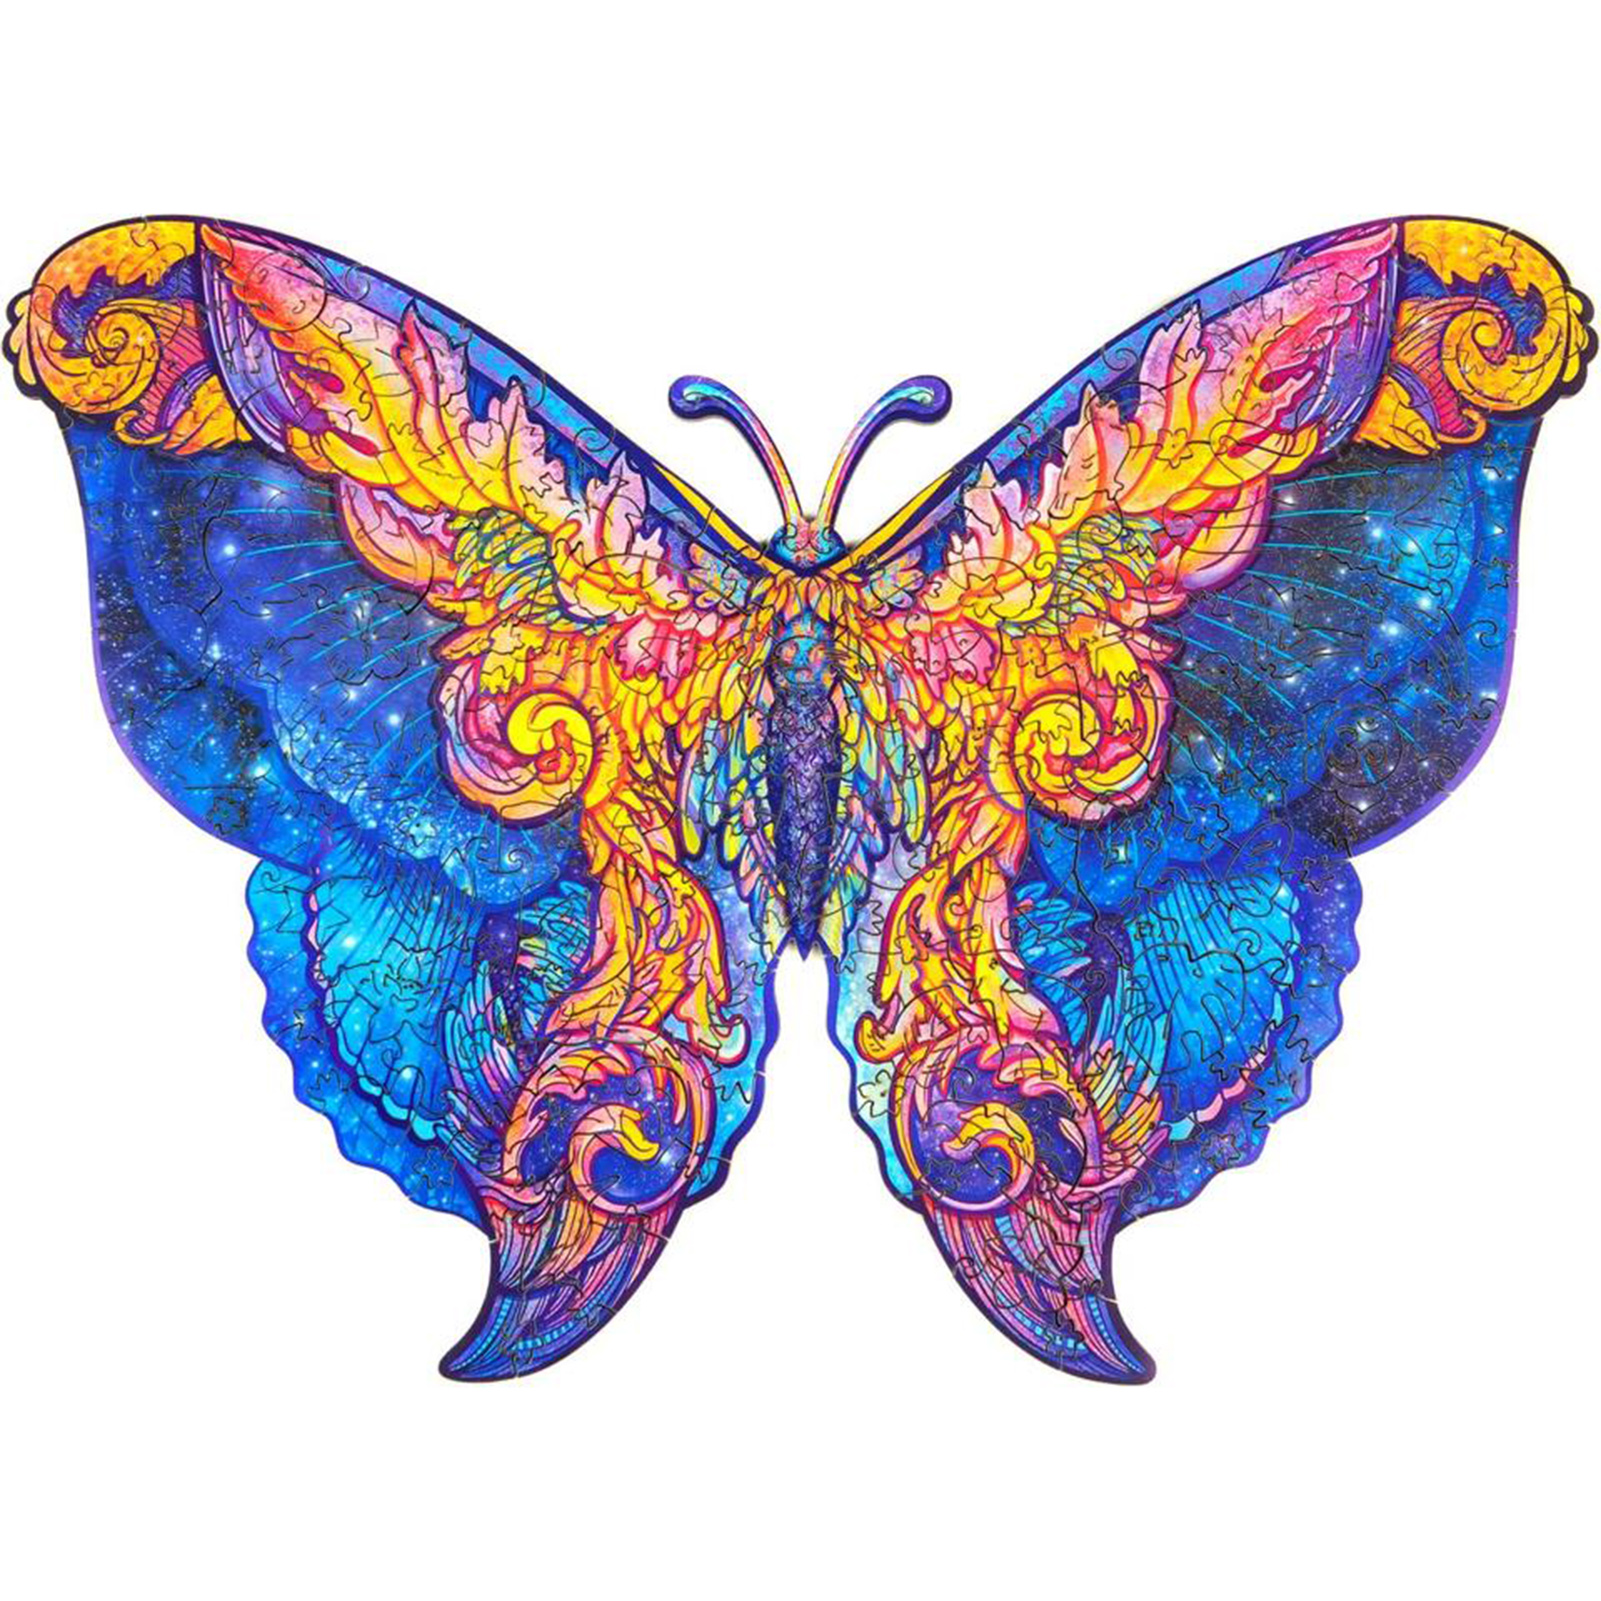 DIY Butterfly Wooden Puzzles Each Piece Is Animal Shaped Best Gift For Adults Children Craft Wooden Jigsaw Puzzle Dropship